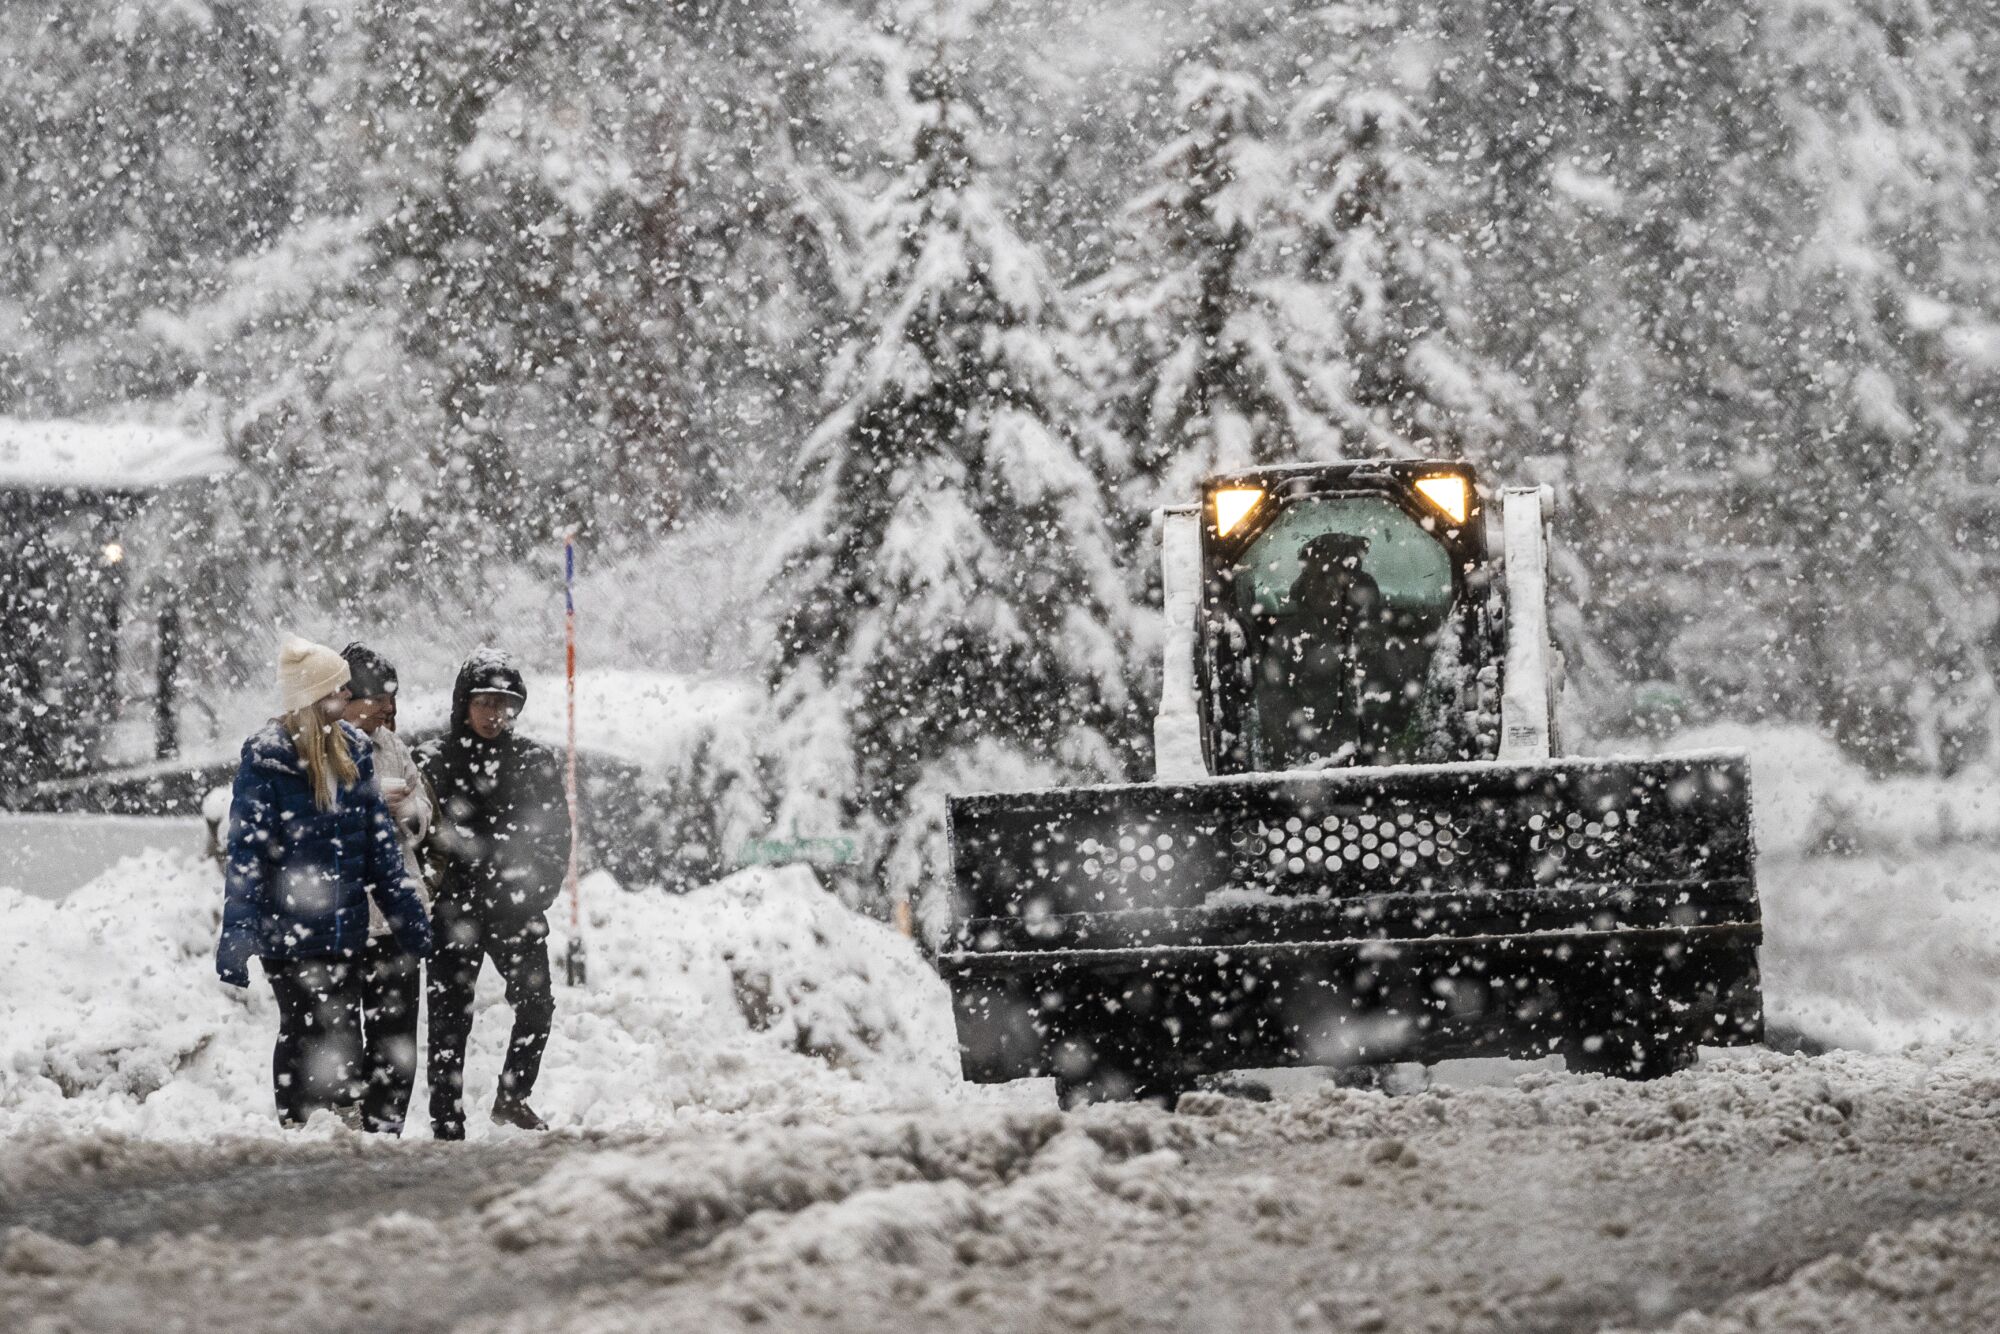 A snowplow runs over pedestrians in South Lake Tahoe.